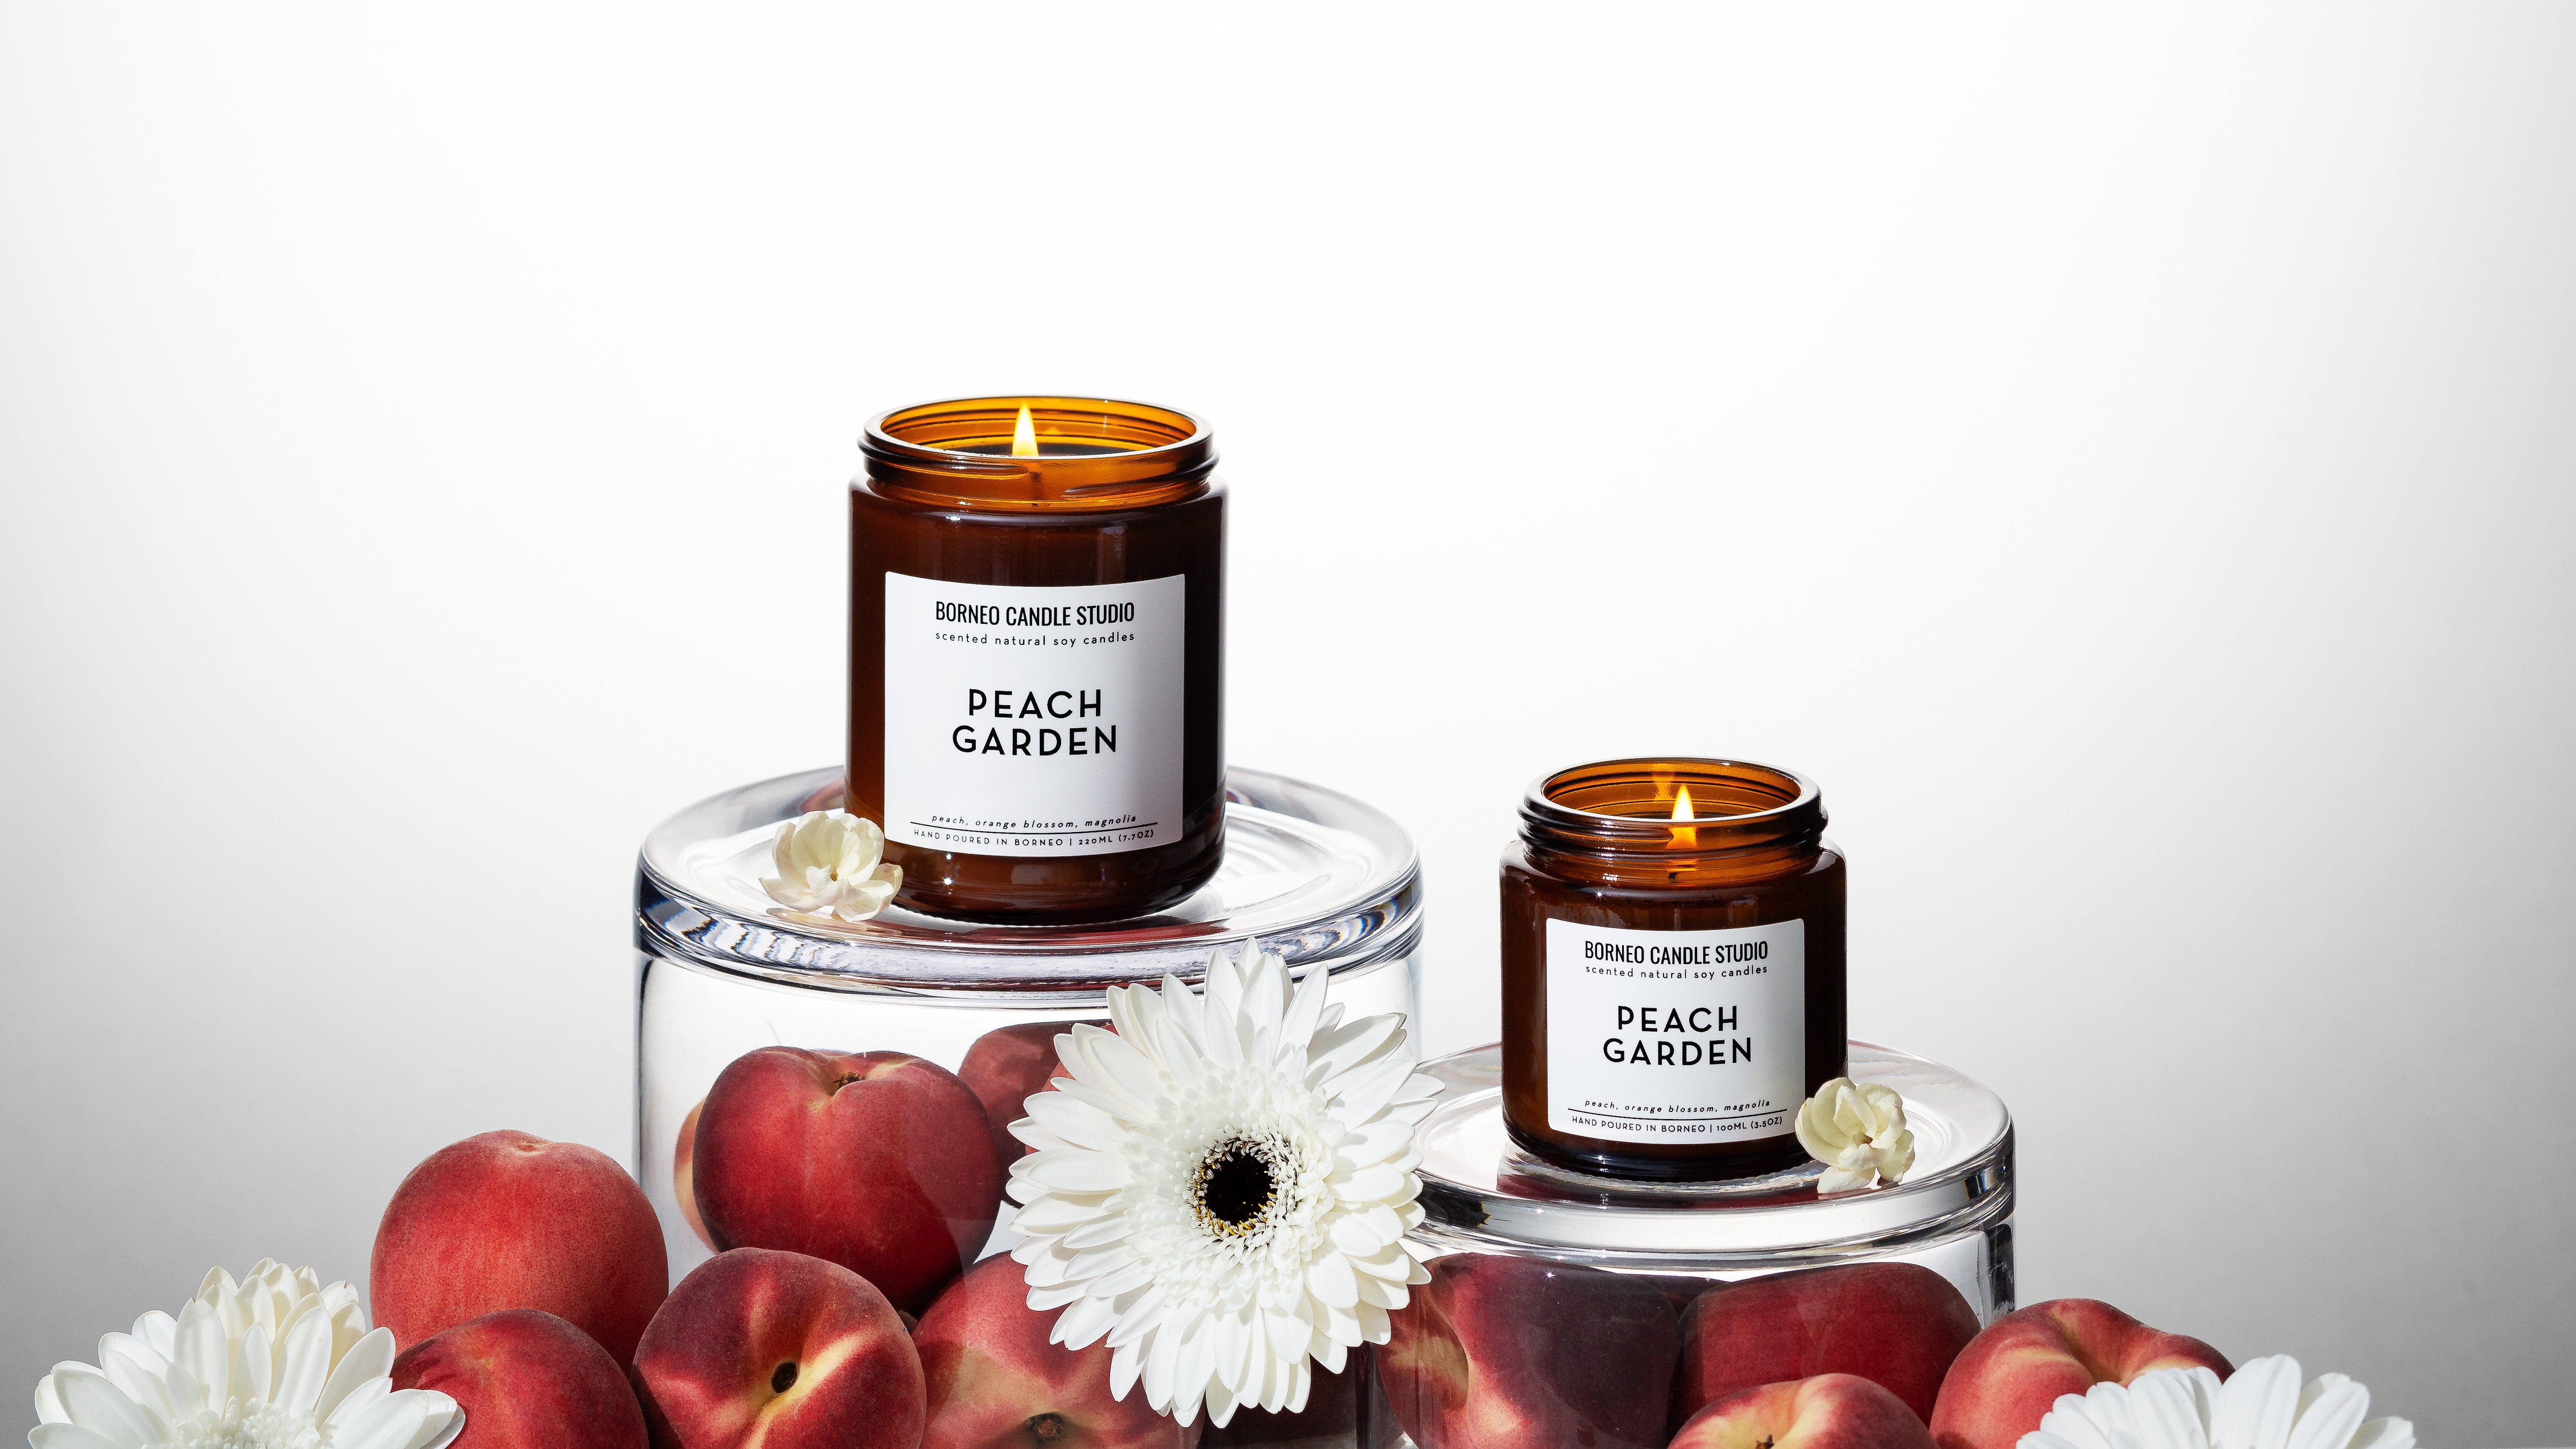 Peach Garden, a fruity floral scented candle with notes of peach, orange blossom and magnolia made by Borneo Candle Studio, a home fragrance brand in Malaysia and Brunei.